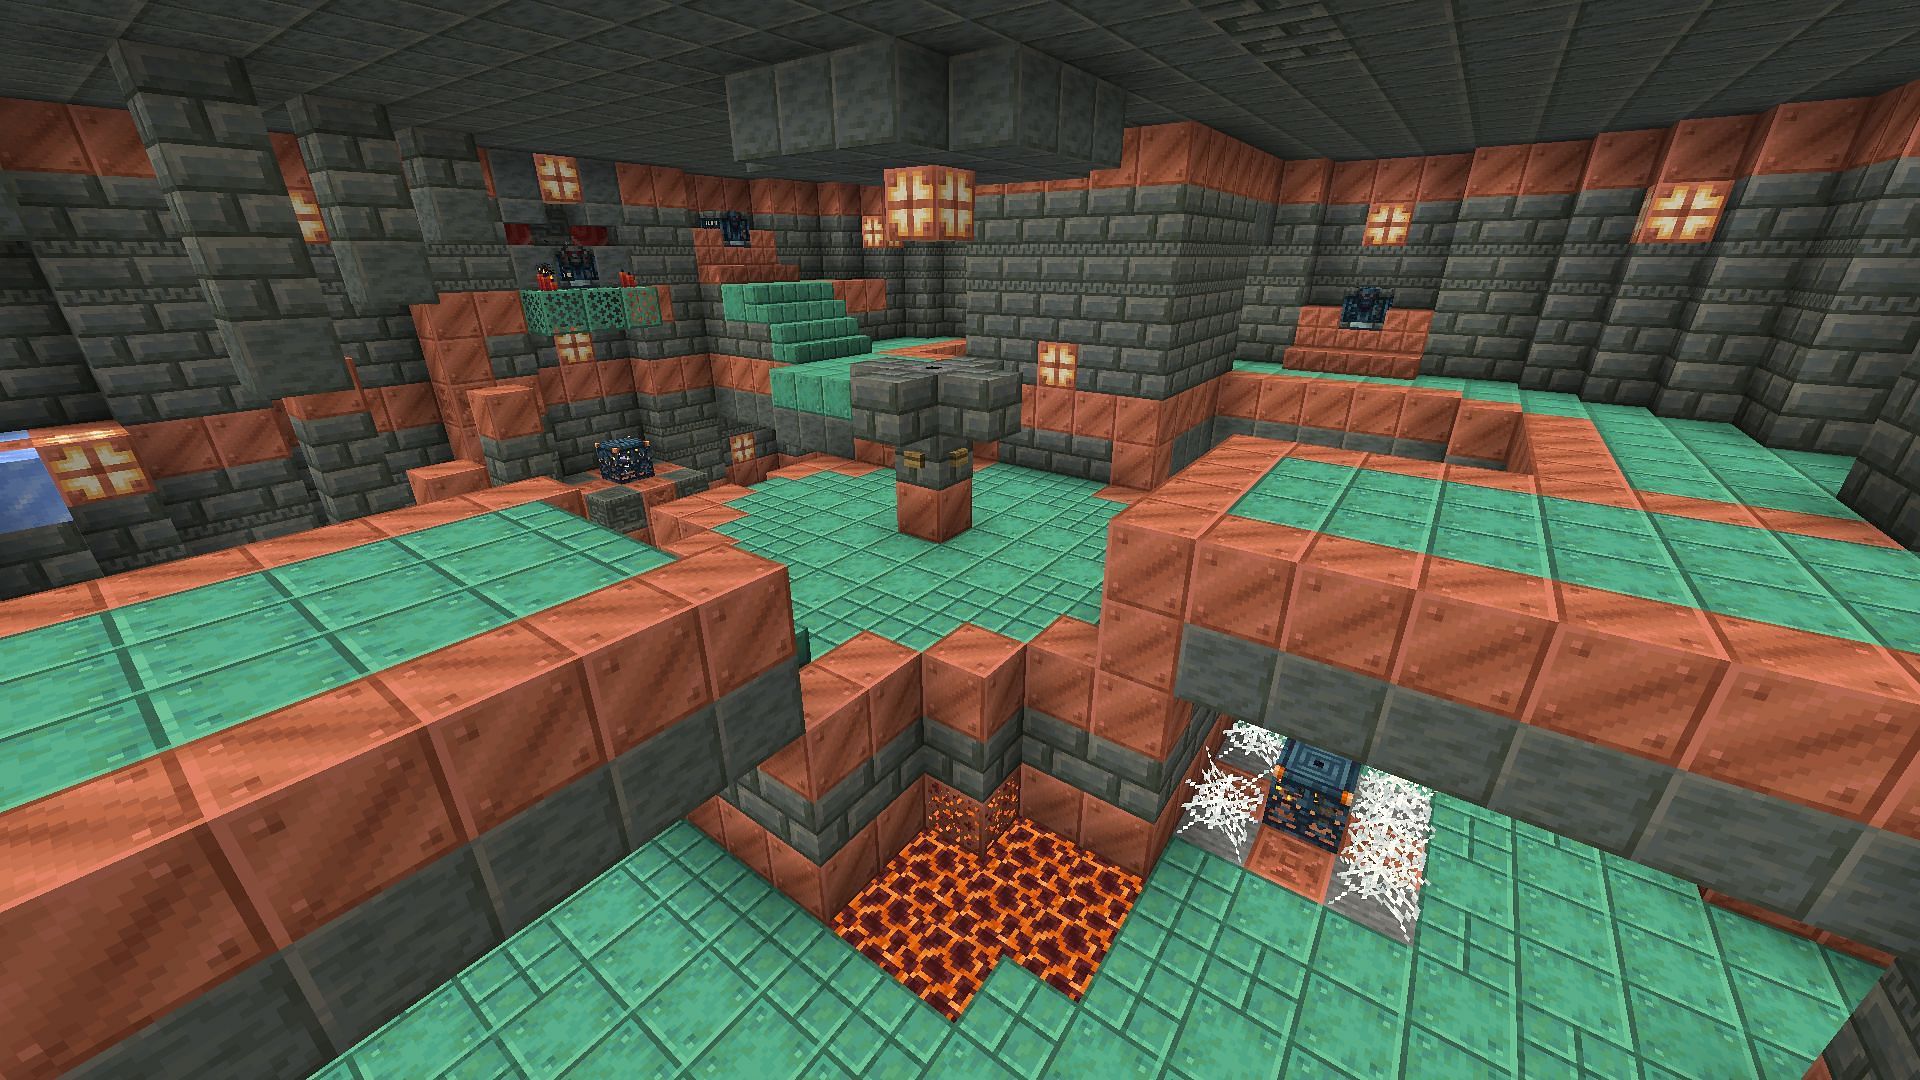 Trial chambers are dangerous due to their maze-like design (Image via Mojang)